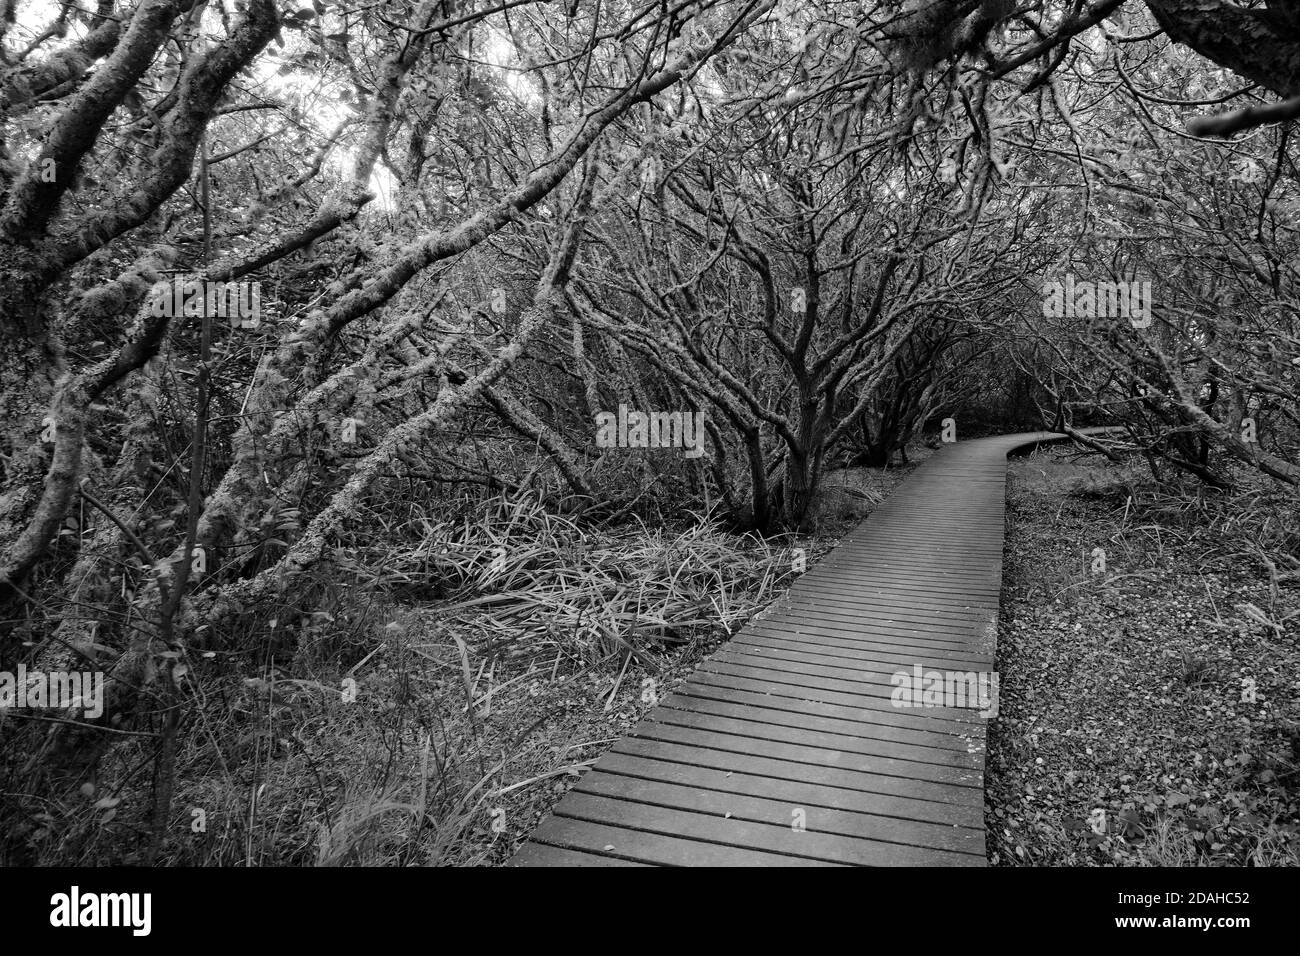 'Enchanted Wood'. Path through lichen-covered trees, Lower Moors, St Mary's, Isles of Scilly, Cornwall, England, UK. (BW) Stock Photo